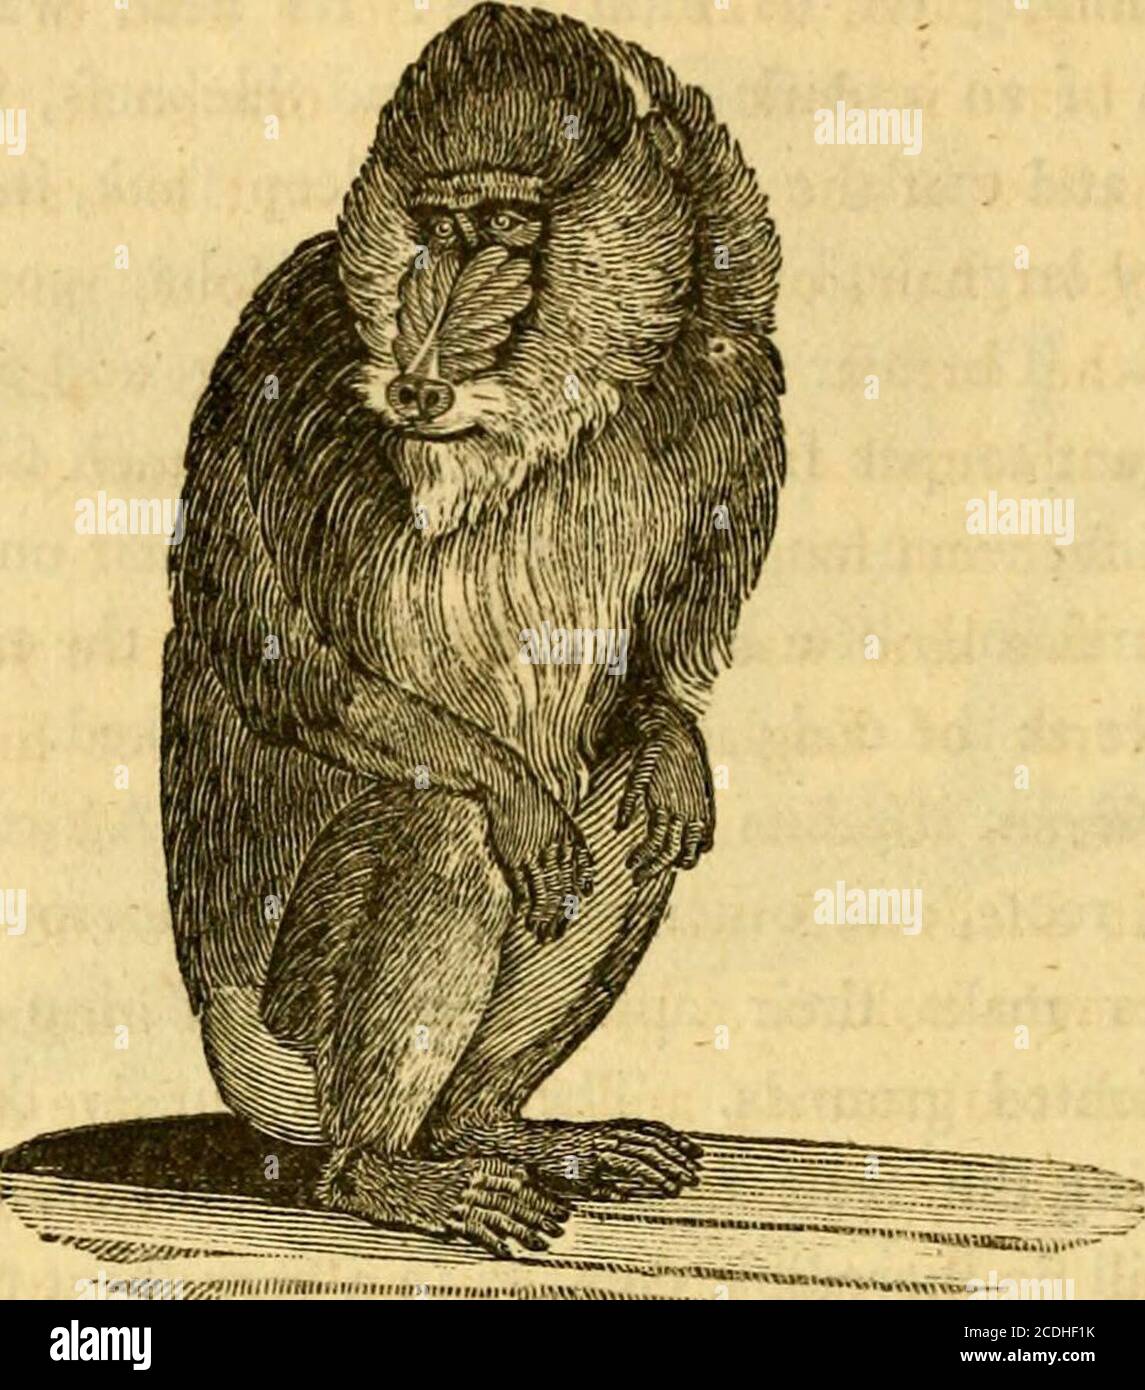 . A general history of quadrupeds : the figures engraved on wood . Ff4 456 HISTORY OF QUADRUPEDS.. y THE RIBBED-NOSE BABOON. (Simia Maimon^ Lin.—Le Mandrill^ BufF.) This fingular creature is no lefs remarkable for itsgreat fize and ftrength, than for the variety of beautifulcolours on different parts of its body. Its nofe is markedwith broad ribs on each fide, of a fine violet-blue colour :A vermilion line begins a little above the eyes ; and, run-ning down on each fide of the nofe, vv^hich is fomevi^hatfimilar to that of a Hog, fpreads over the tip of it: Theinfides of the ears are blue, whic Stock Photo